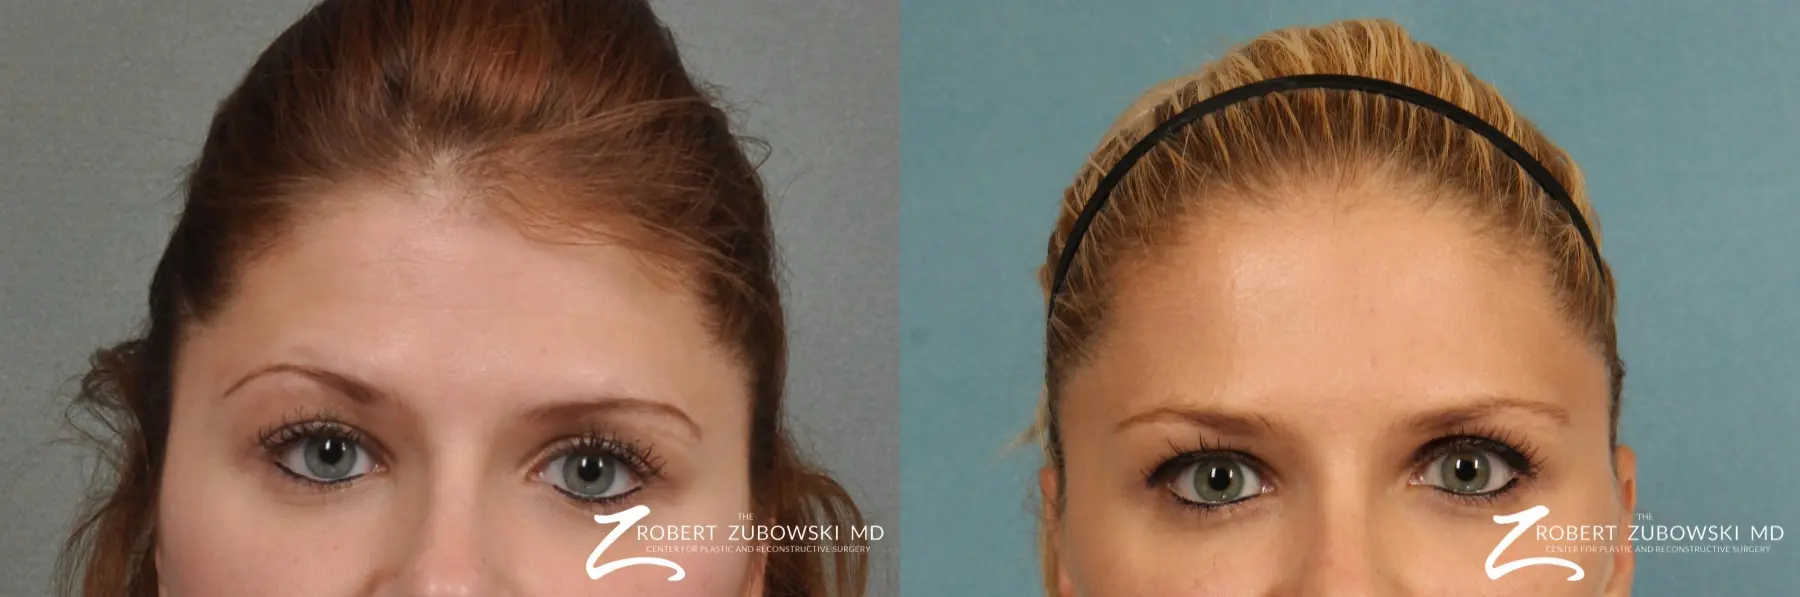 BOTOX® Cosmetic: Patient 3 - Before and After 1